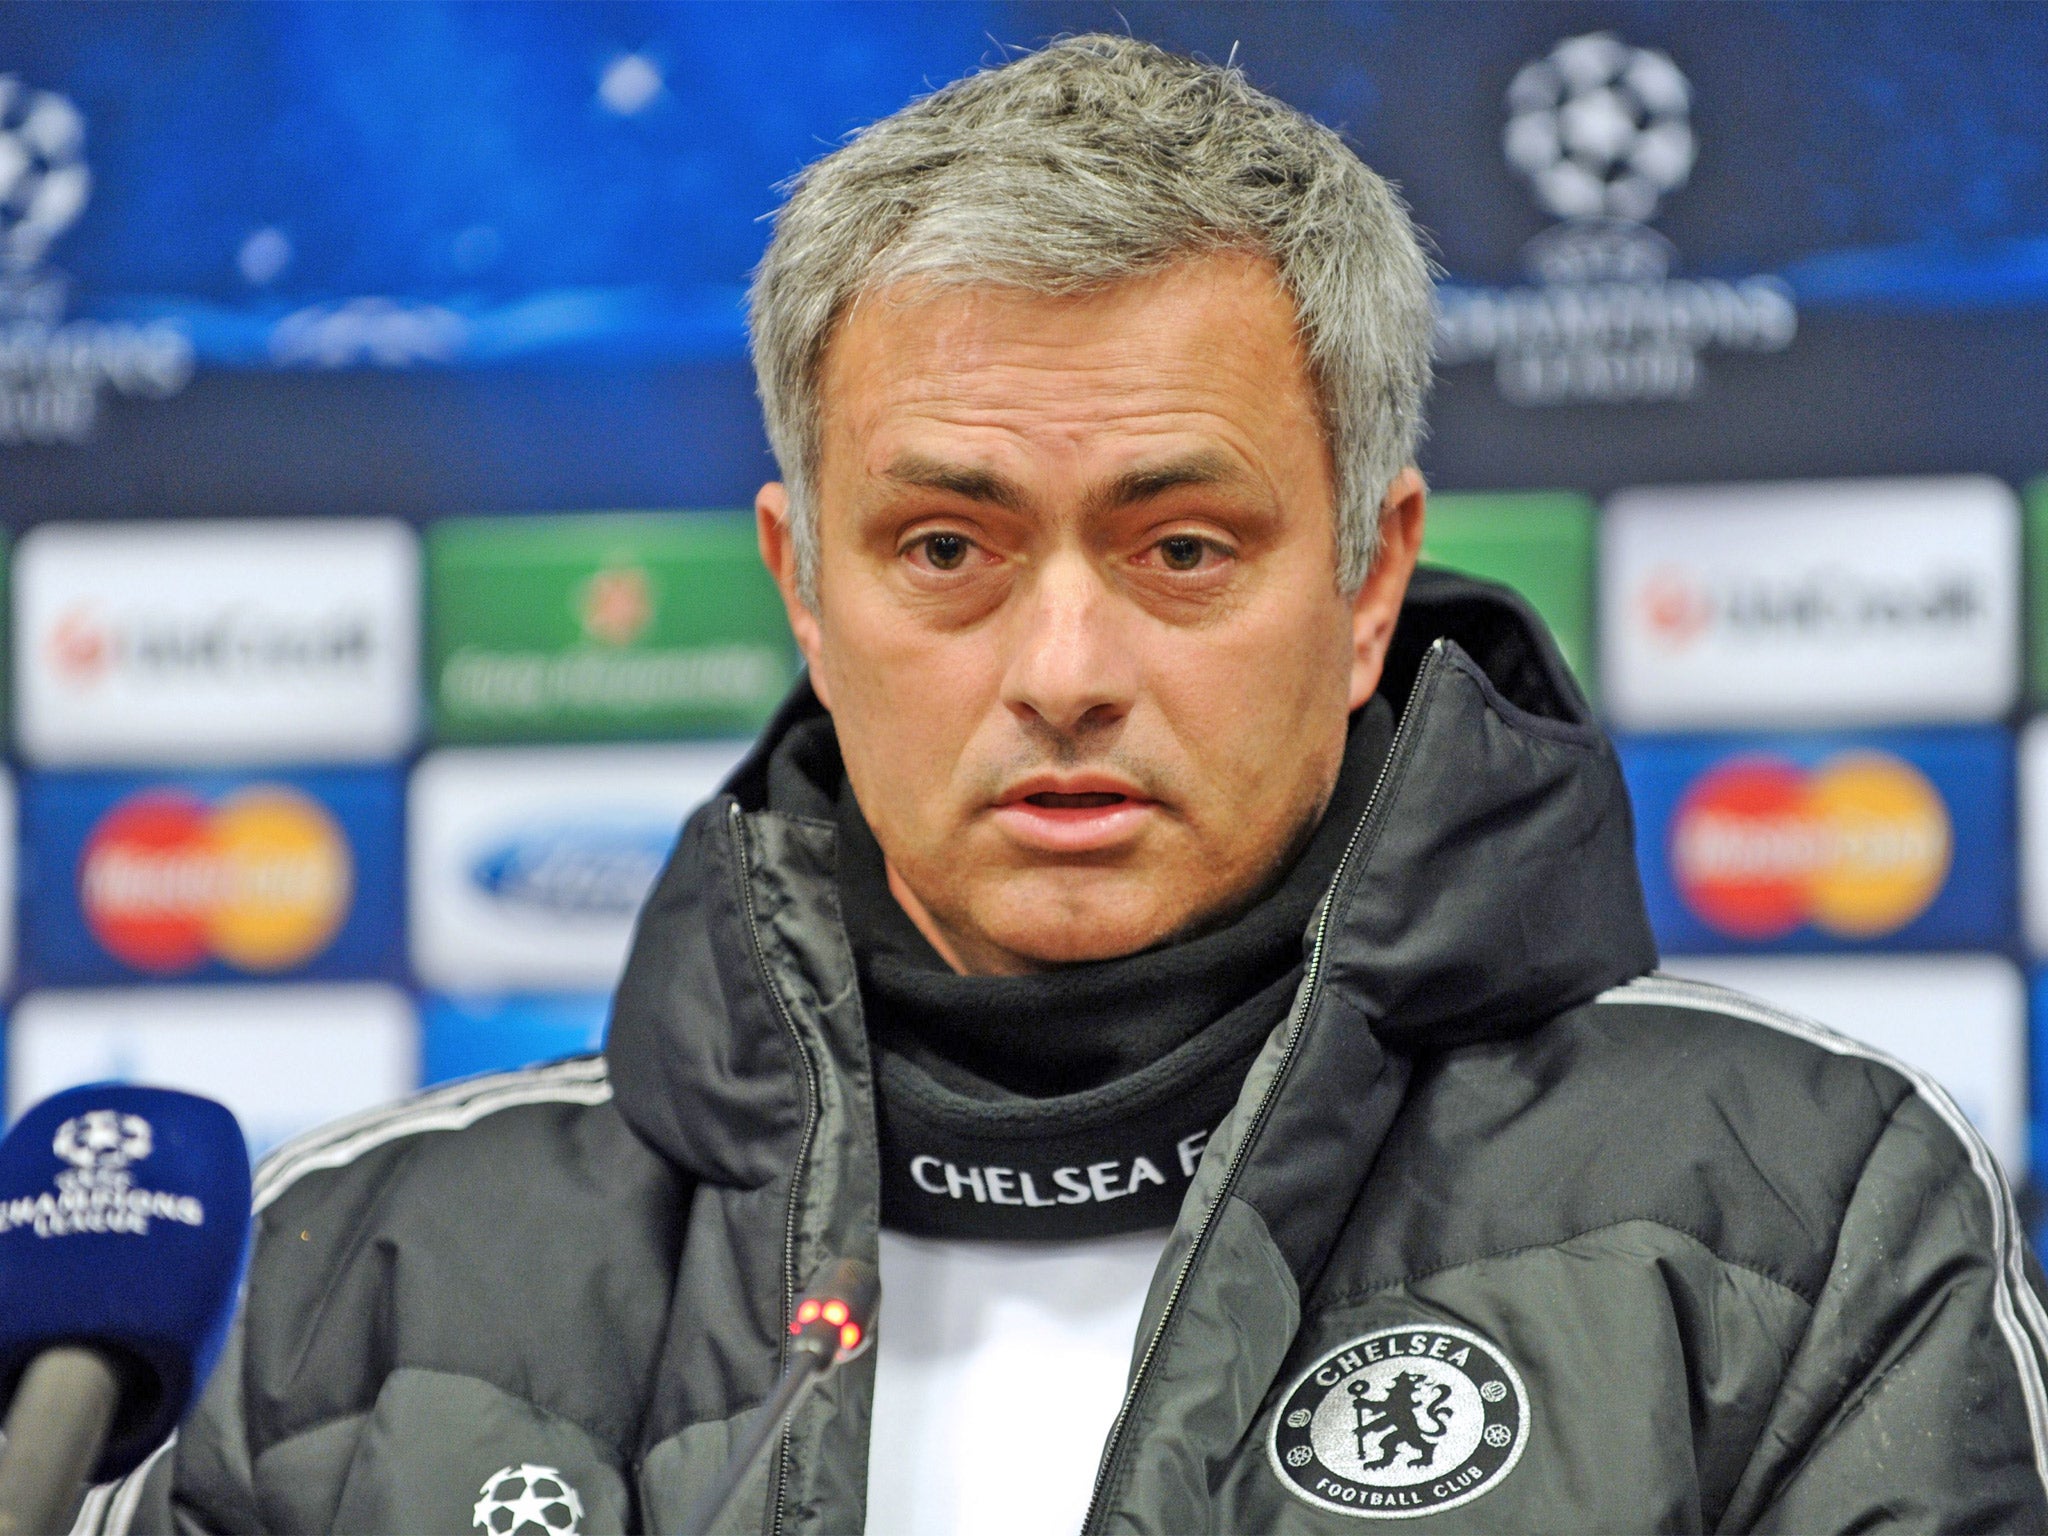 Jose Mourinho laughed off claims Roberto Mancini built his 2010 European Cup winning side